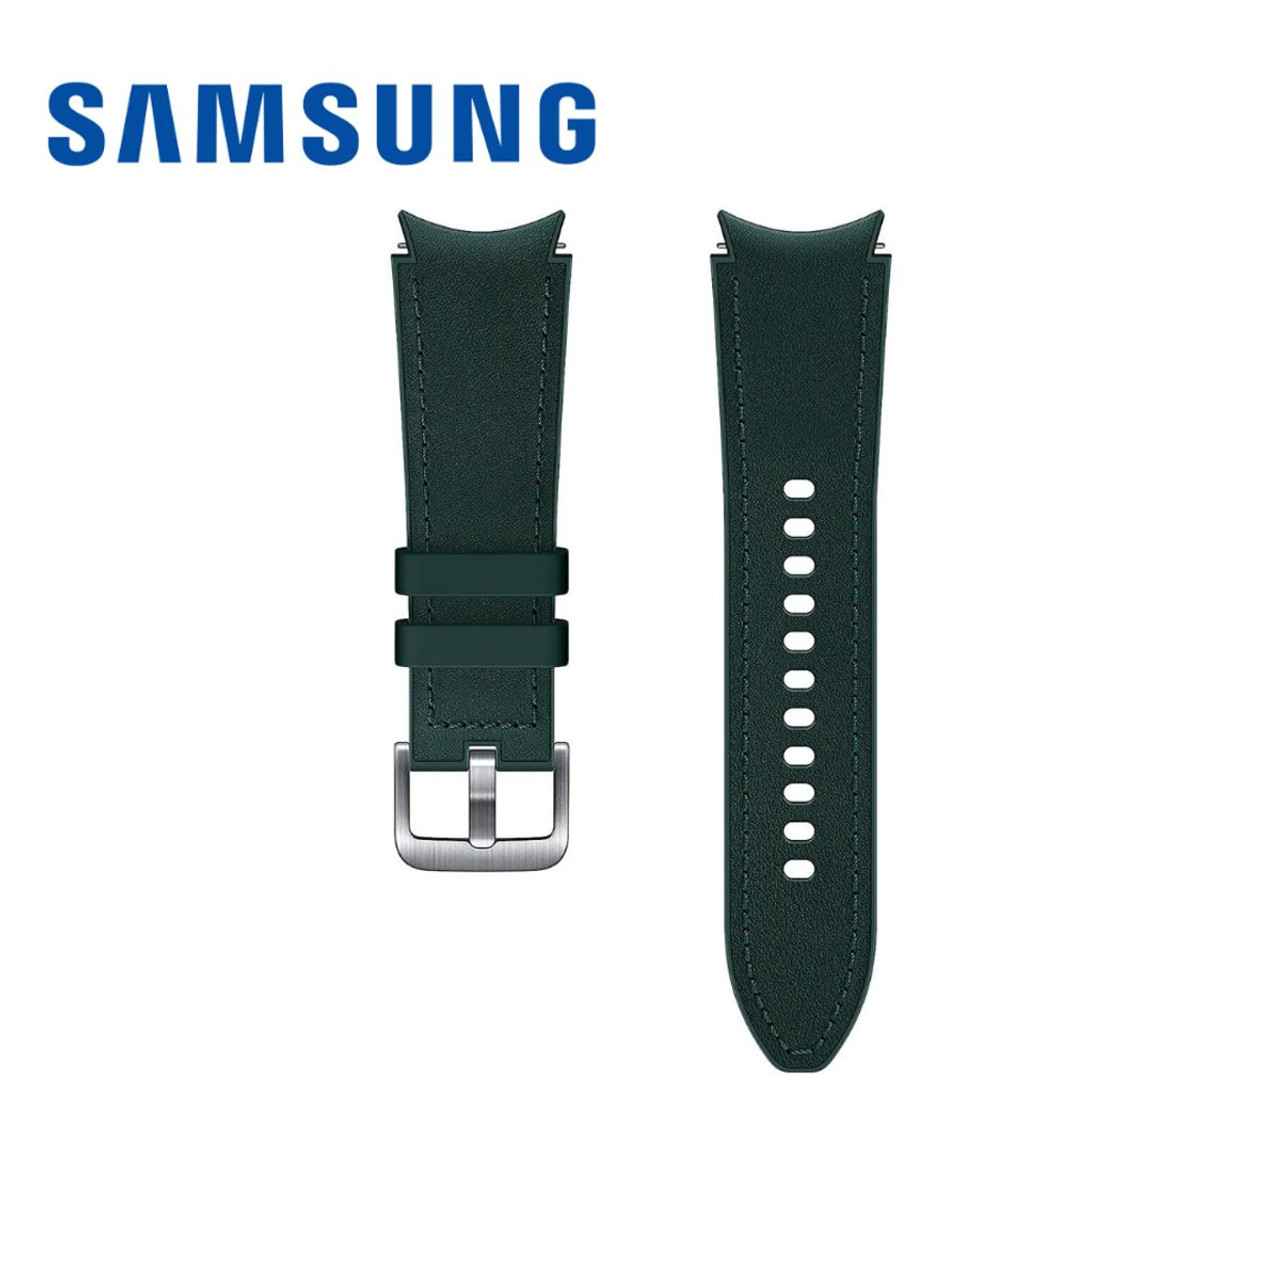 Samsung S/M Leather Band for 20mm Galaxy Watch product image